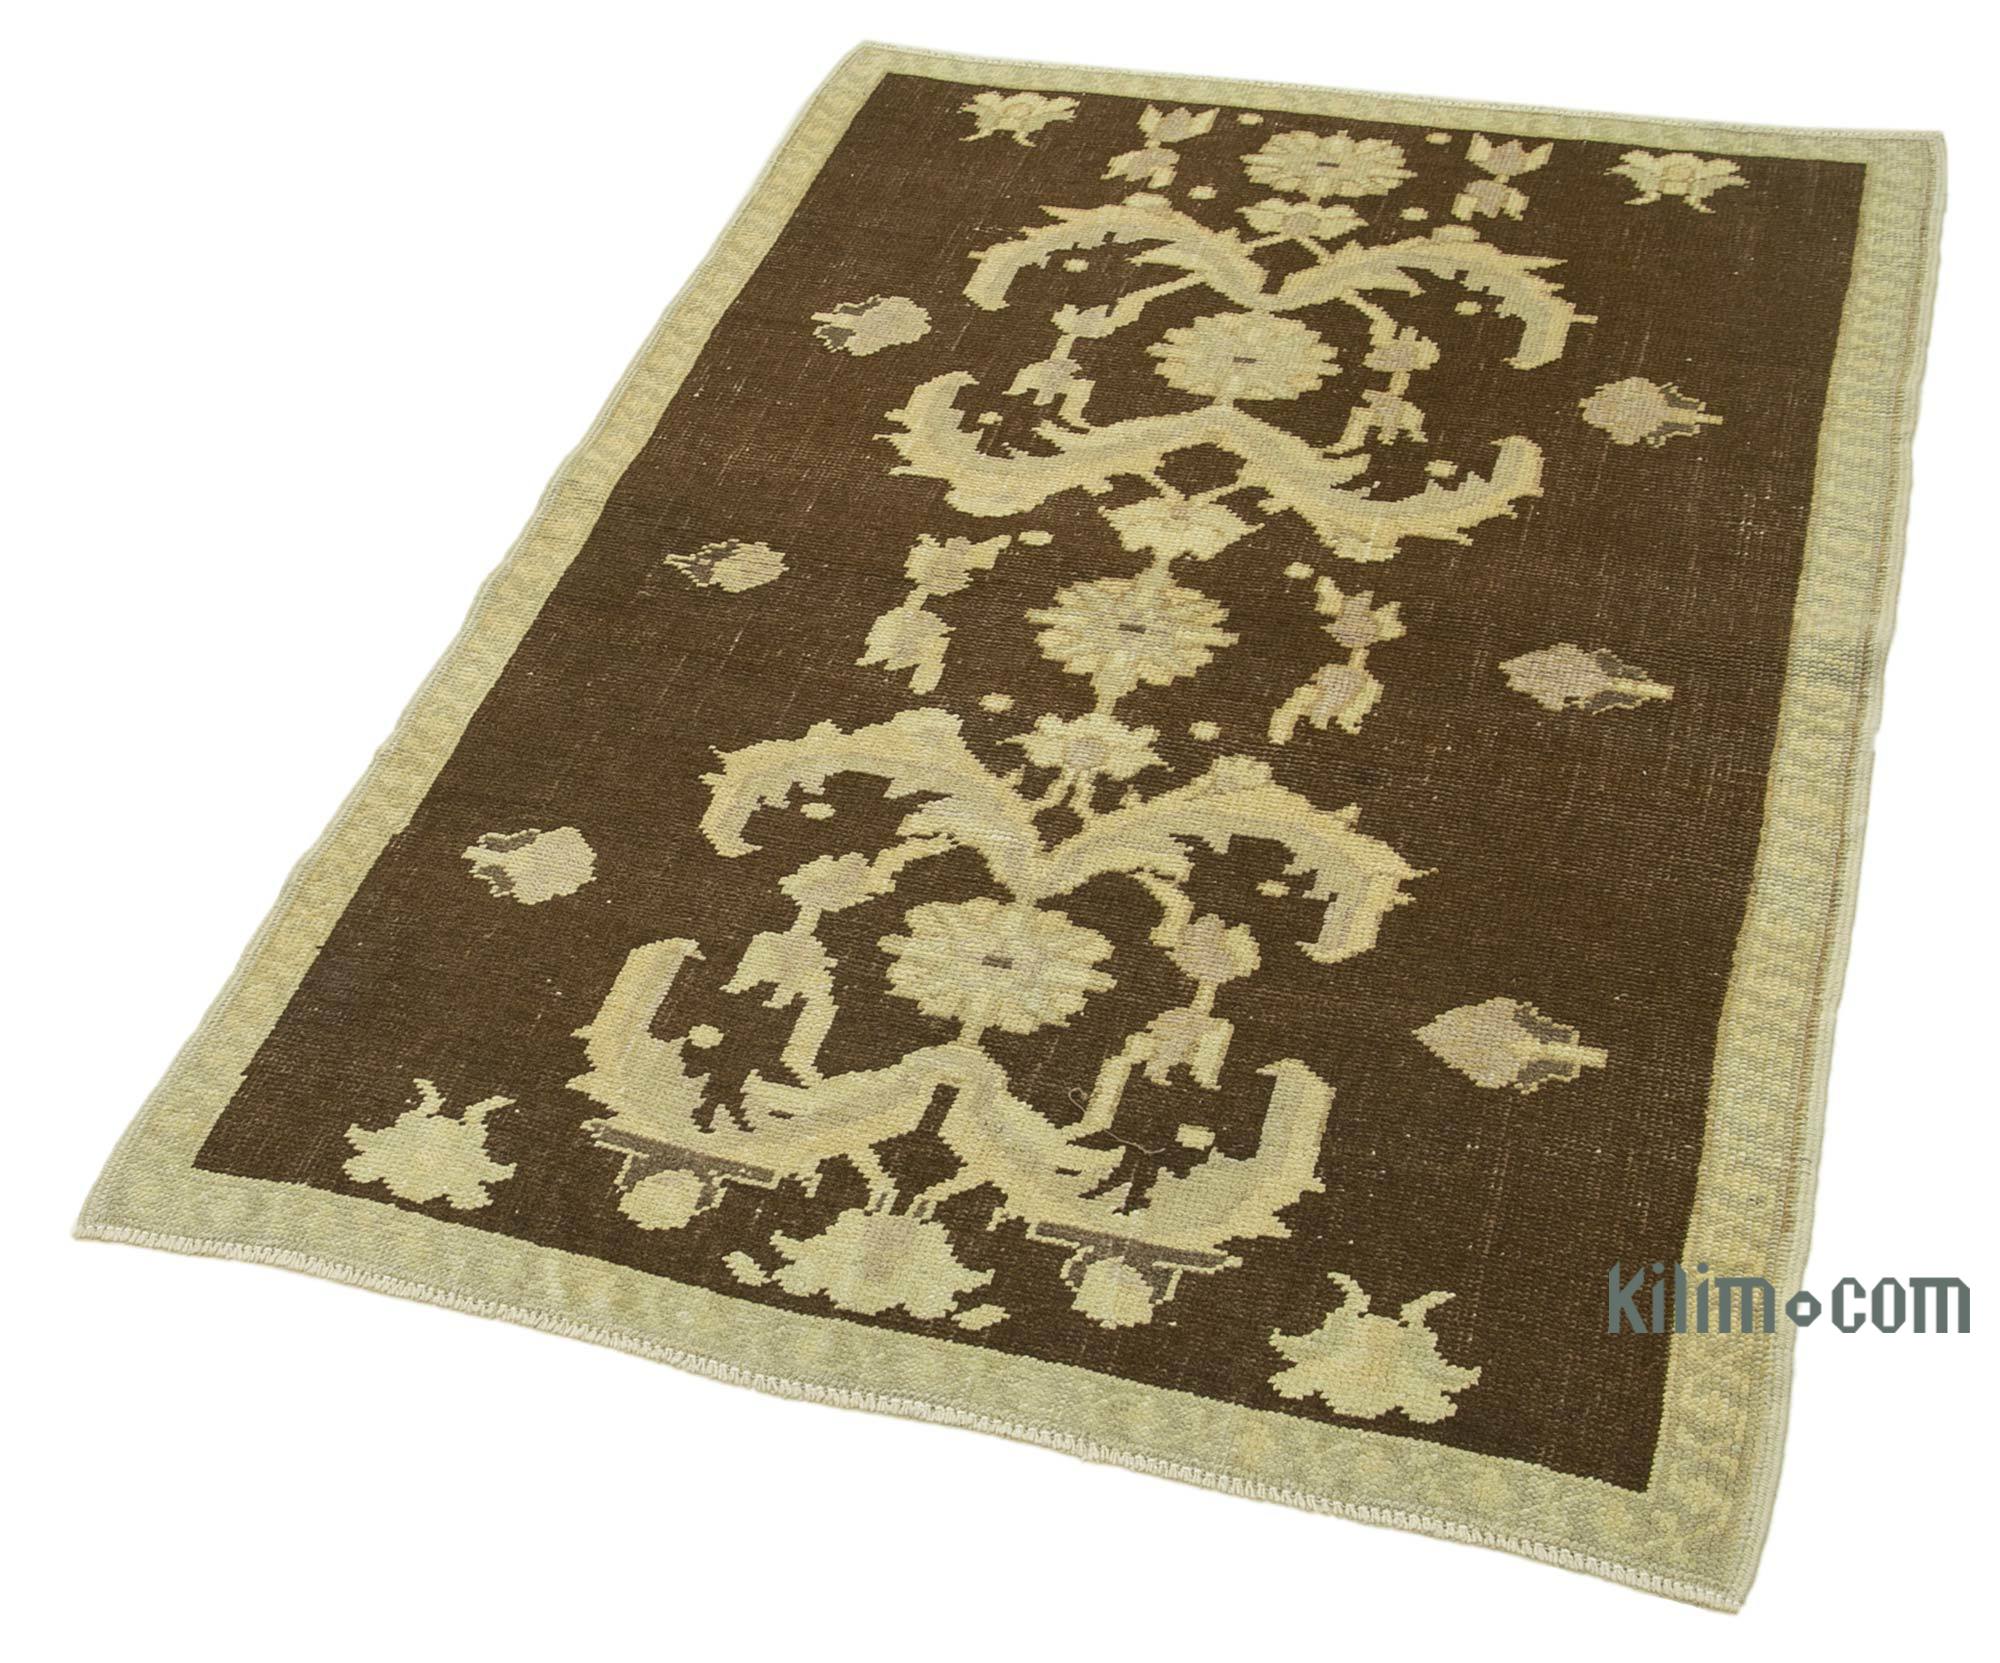 K0056902 New Handwoven Turkish Kilim Rug - 3' 3 x 4' 9 (39 x 57)  The  Source for Vintage Rugs, Tribal Kilim Rugs, Wool Turkish Rugs, Overdyed  Persian Rugs, Runner Rugs